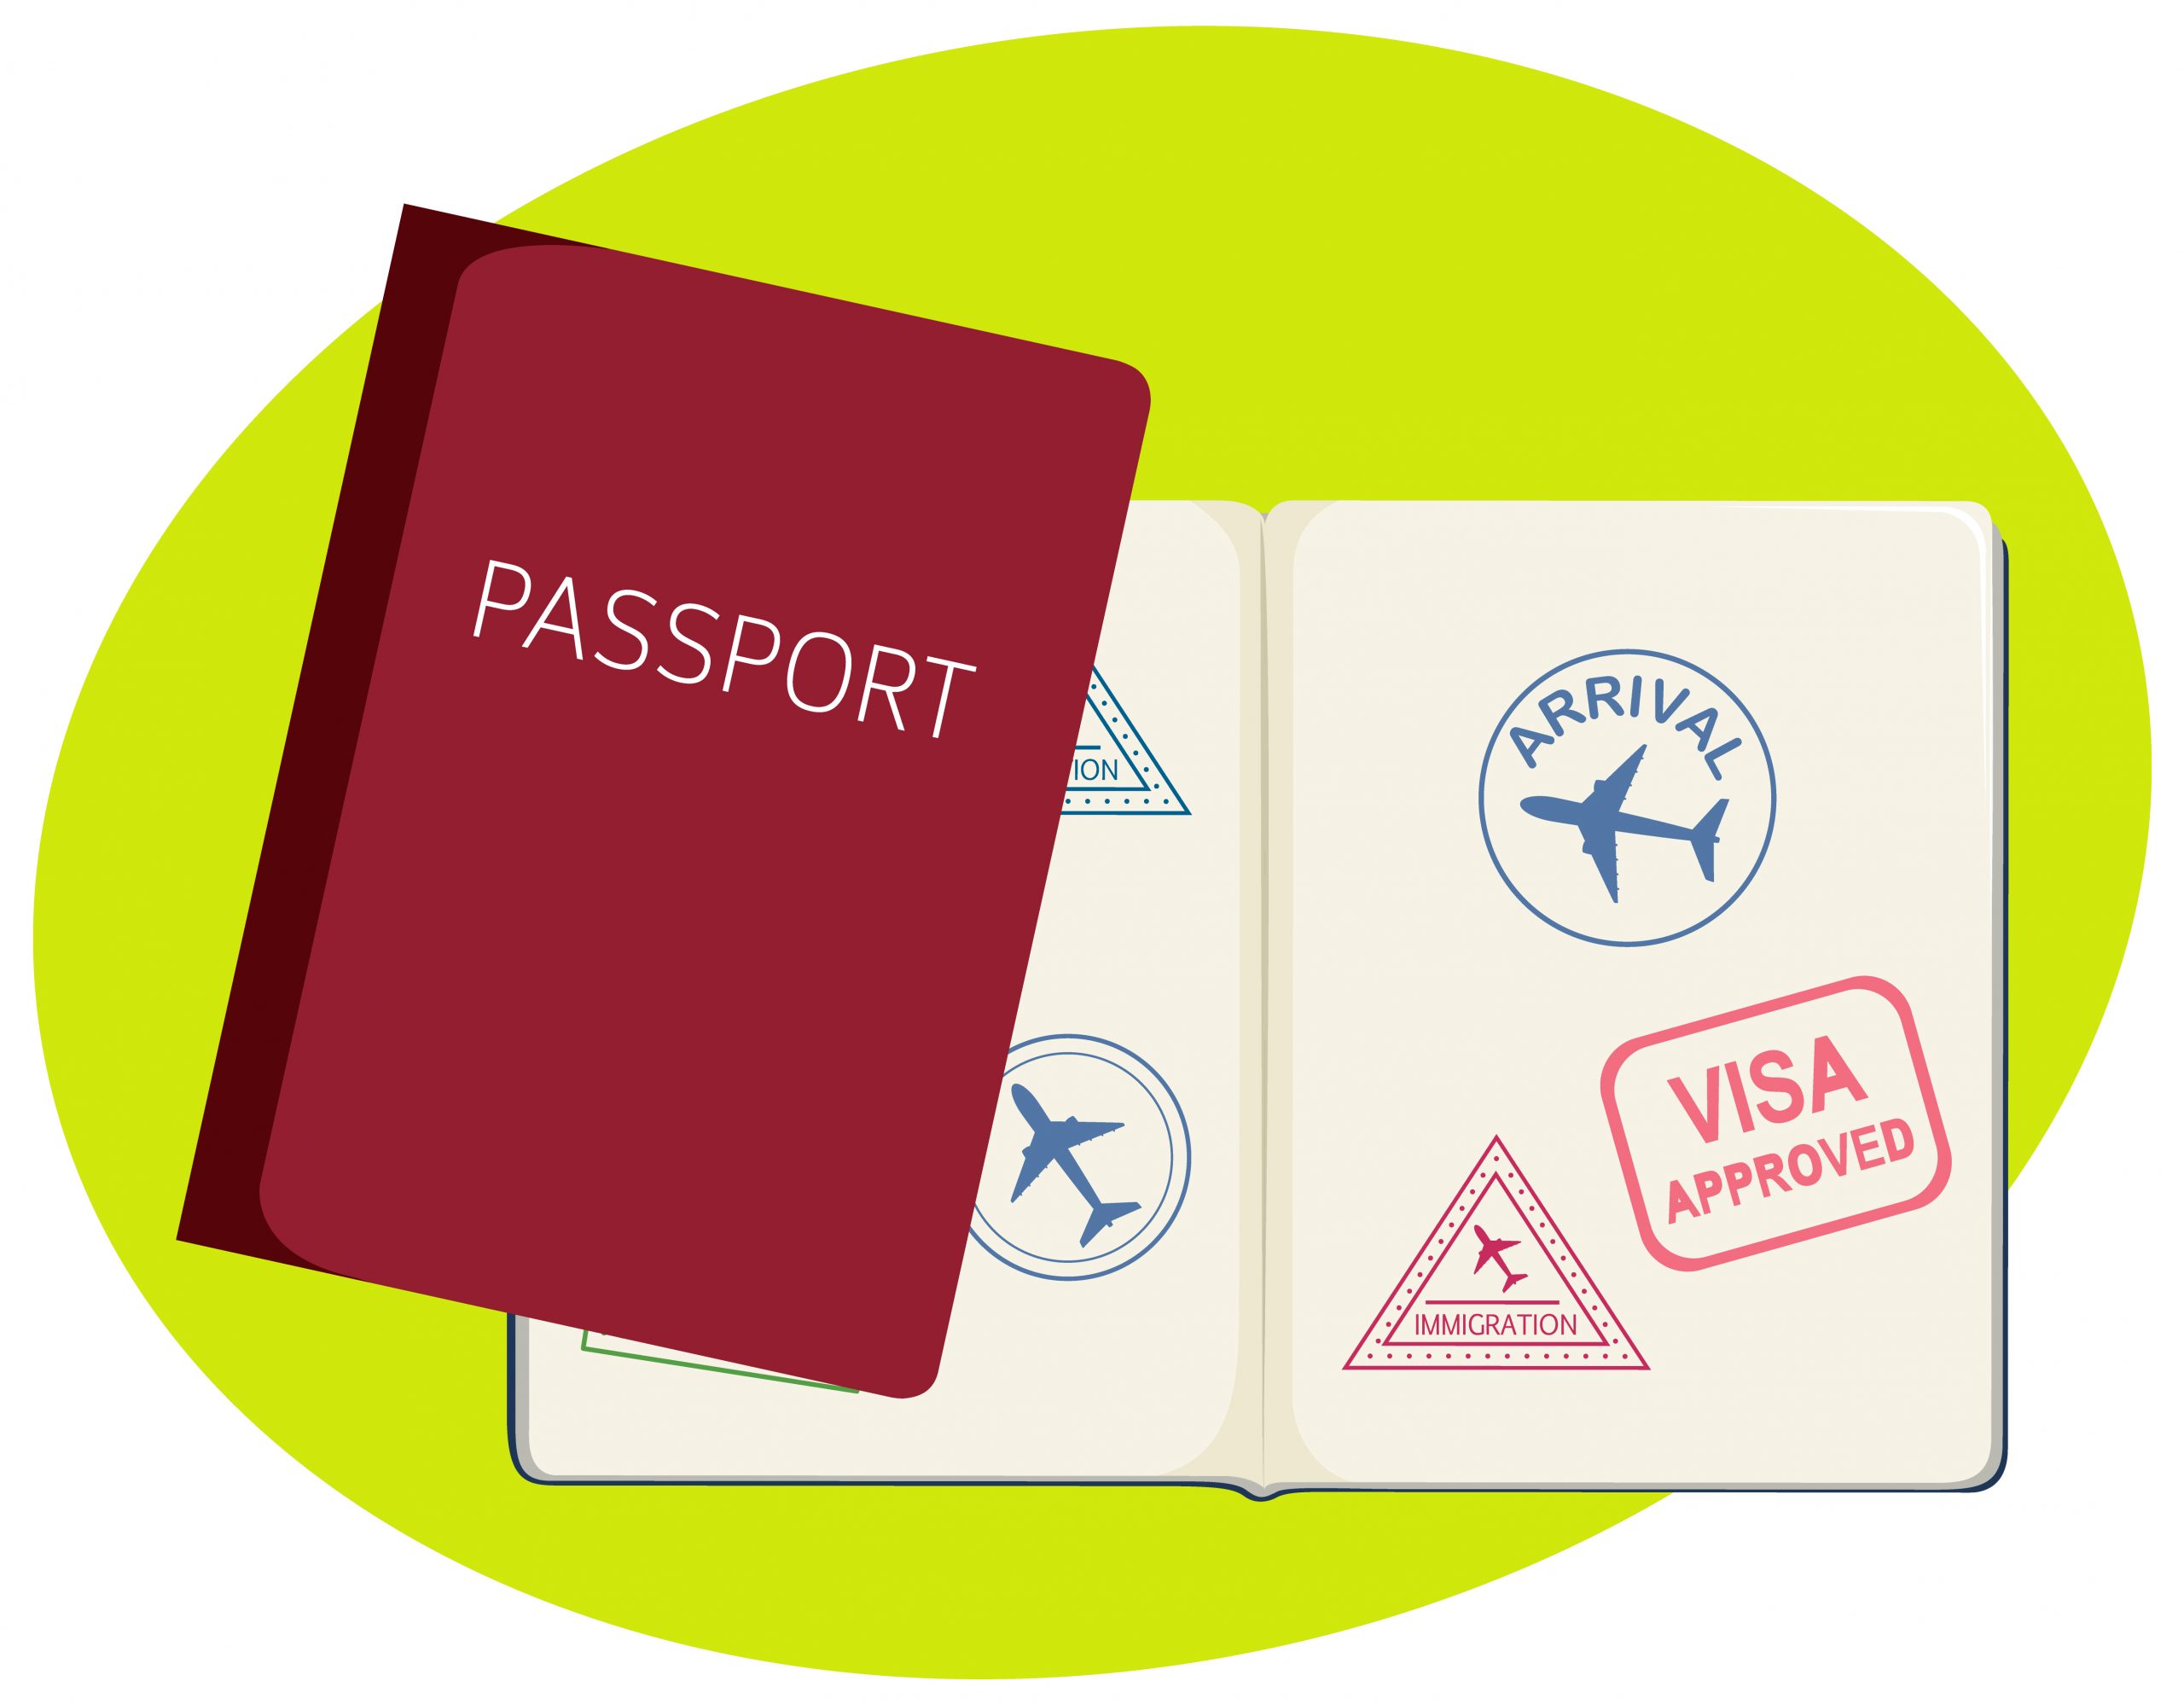 Closed and opened passports in cartoon style